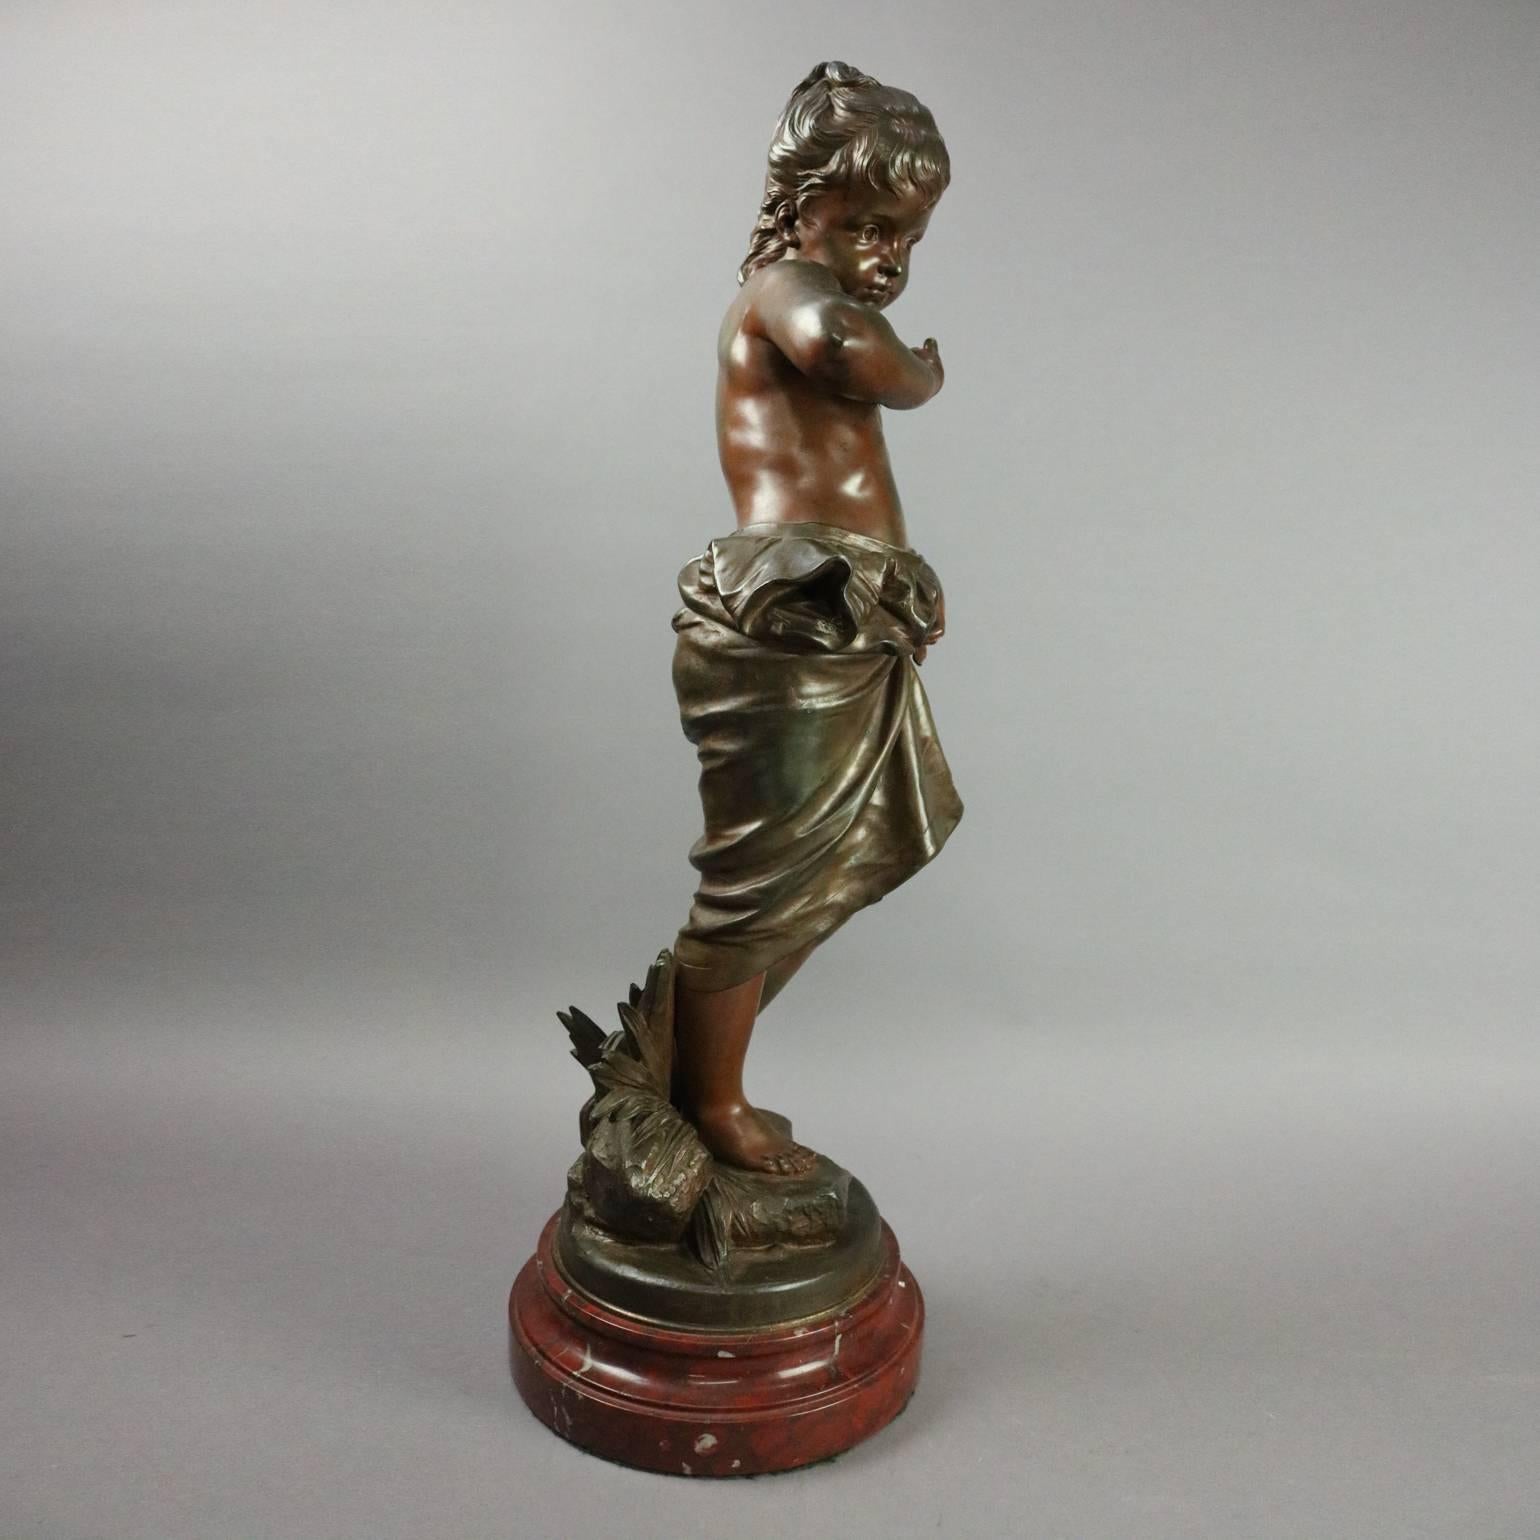 Antique figural bronzed white metal sculpture of young child by listed artist Eutrope Bouret (French, 1833-1906), signed, marble base, circa 1880

Measures - 25" H x 8" W x 7" D

Biography
Eutrope Bouret (16 April 1833 in Paris –